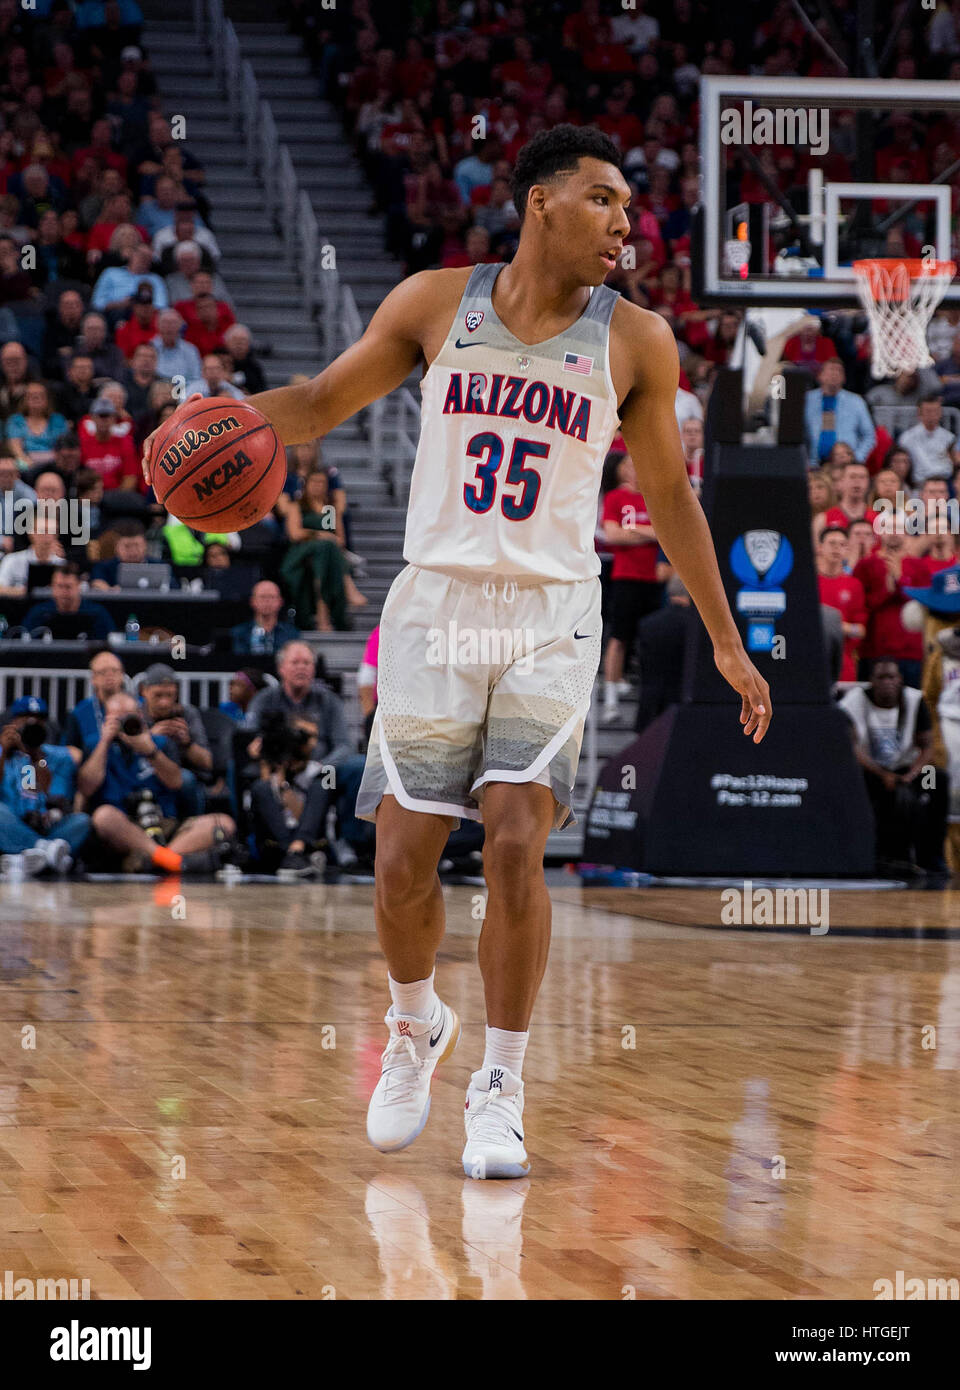 Jordan Brand Classic West Team guard Allonzo Trier during the